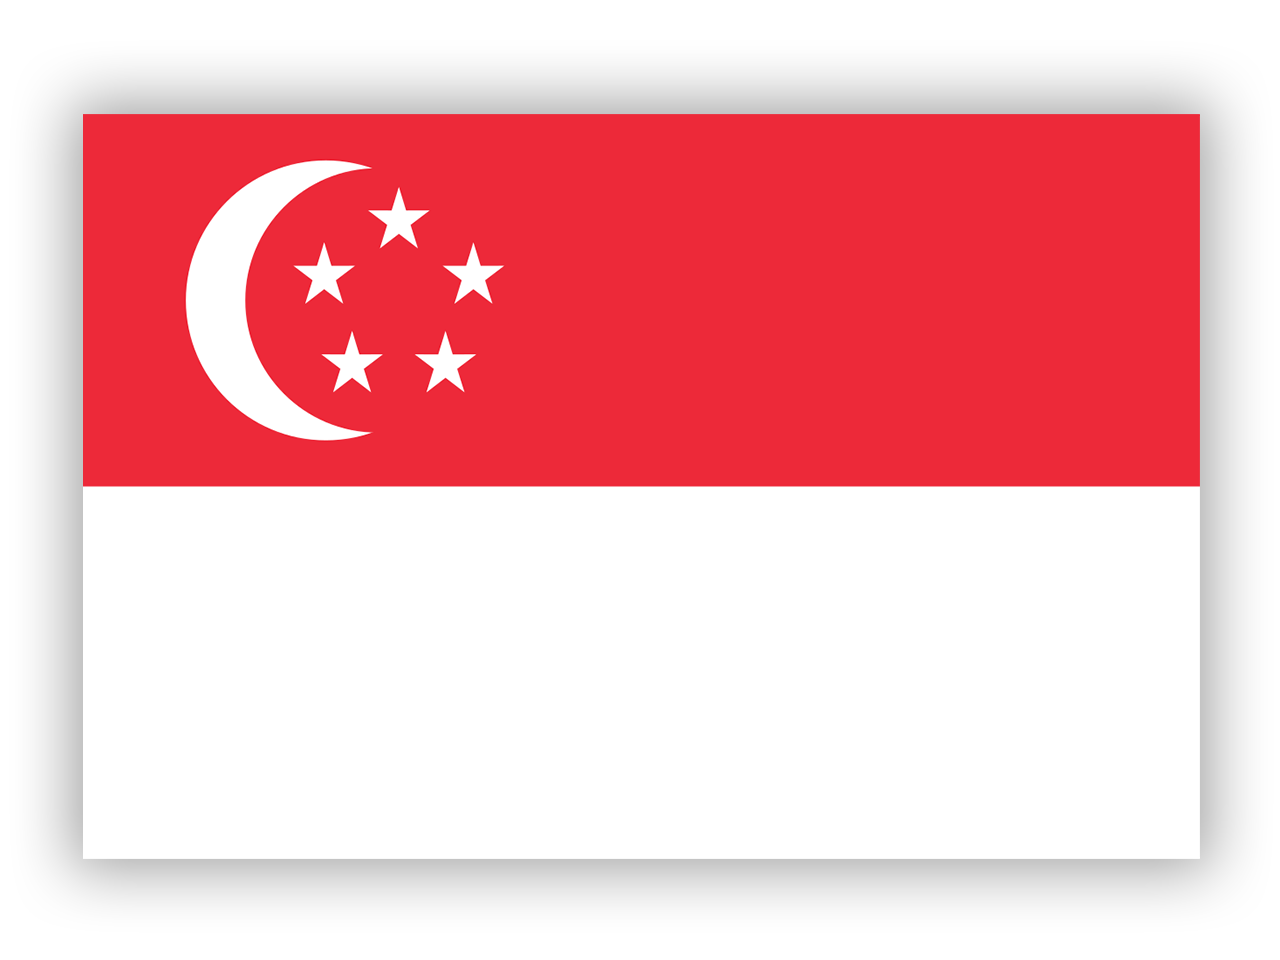 TRACE AsiaPac Webinar Series: An Overview of the Anti-Corruption Landscape in Singapore